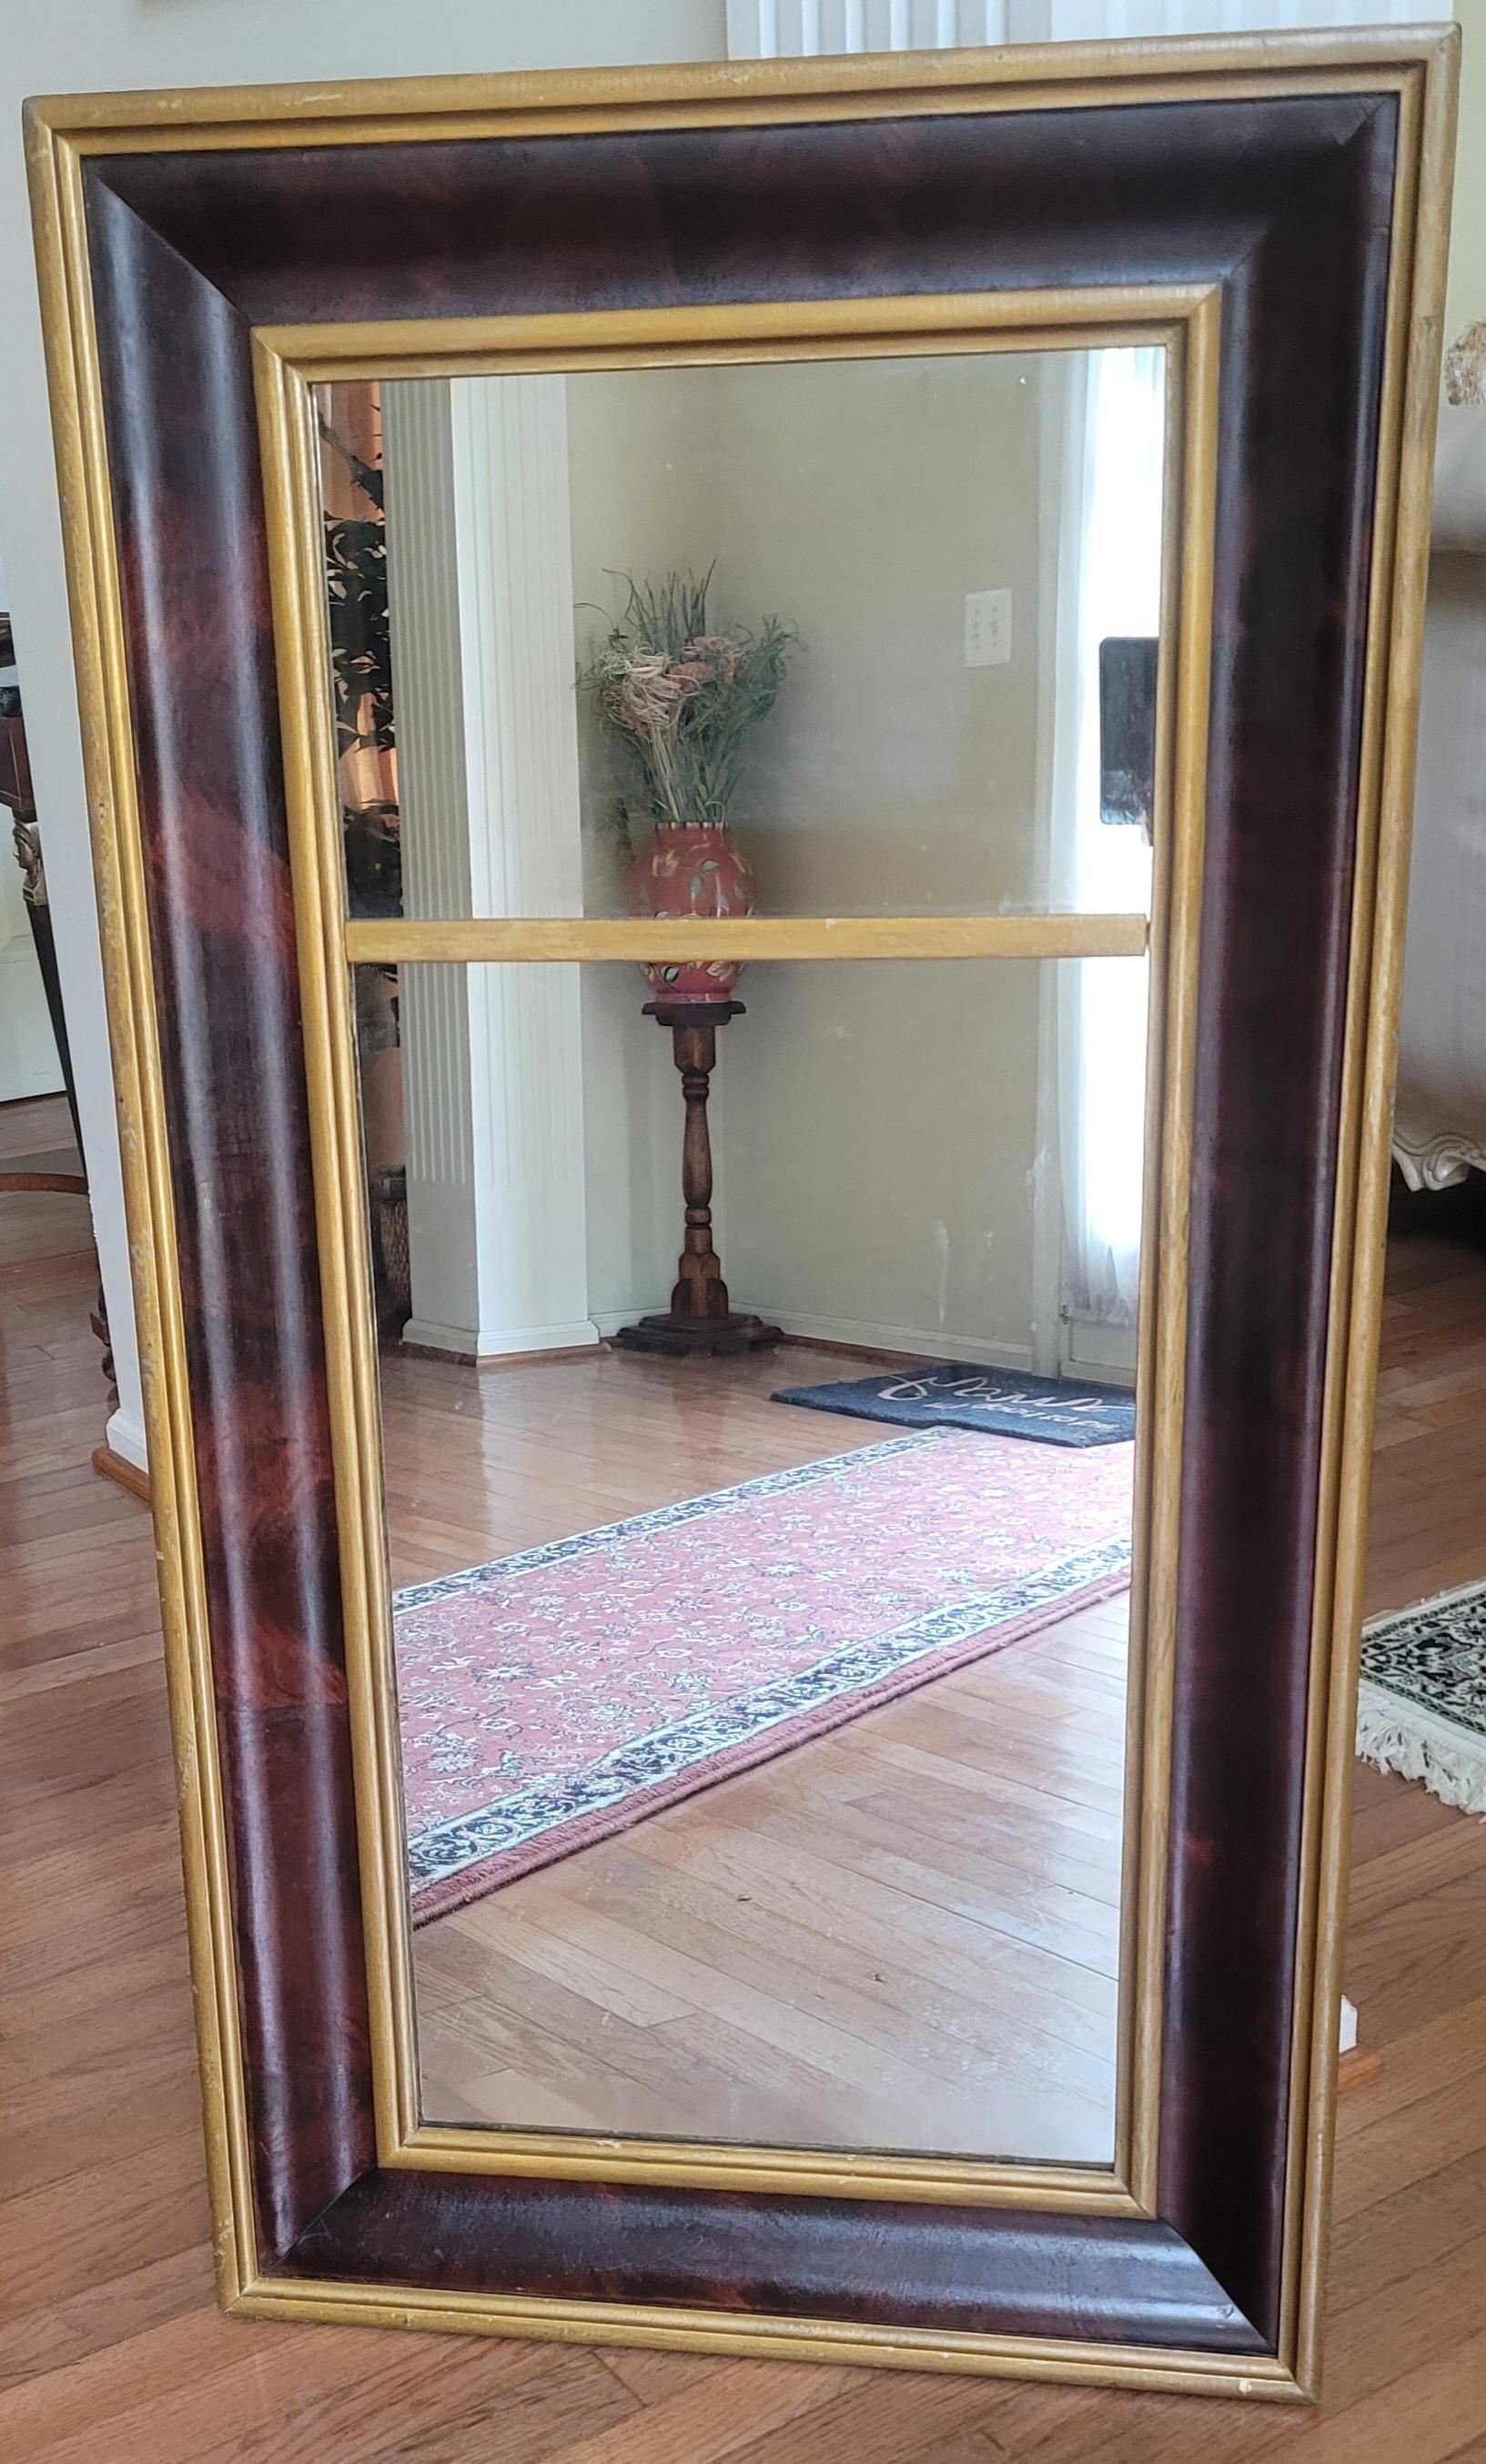 Charming mid-19th century Antique flame mahogany and giltwood American Empire Trumeau wall mirror in good antique condition.
Measures 24.75